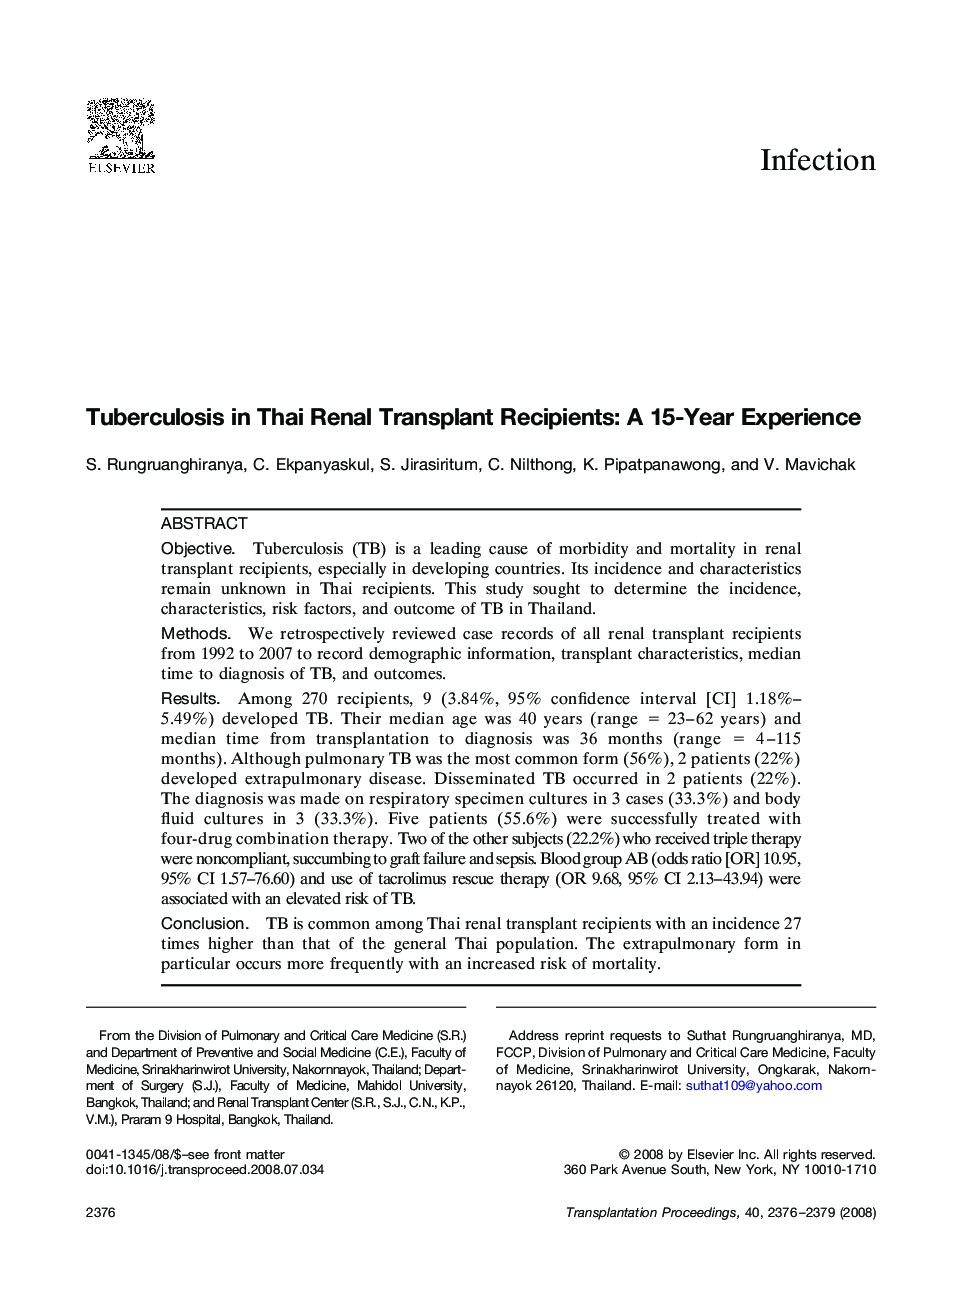 Tuberculosis in Thai Renal Transplant Recipients: A 15-Year Experience